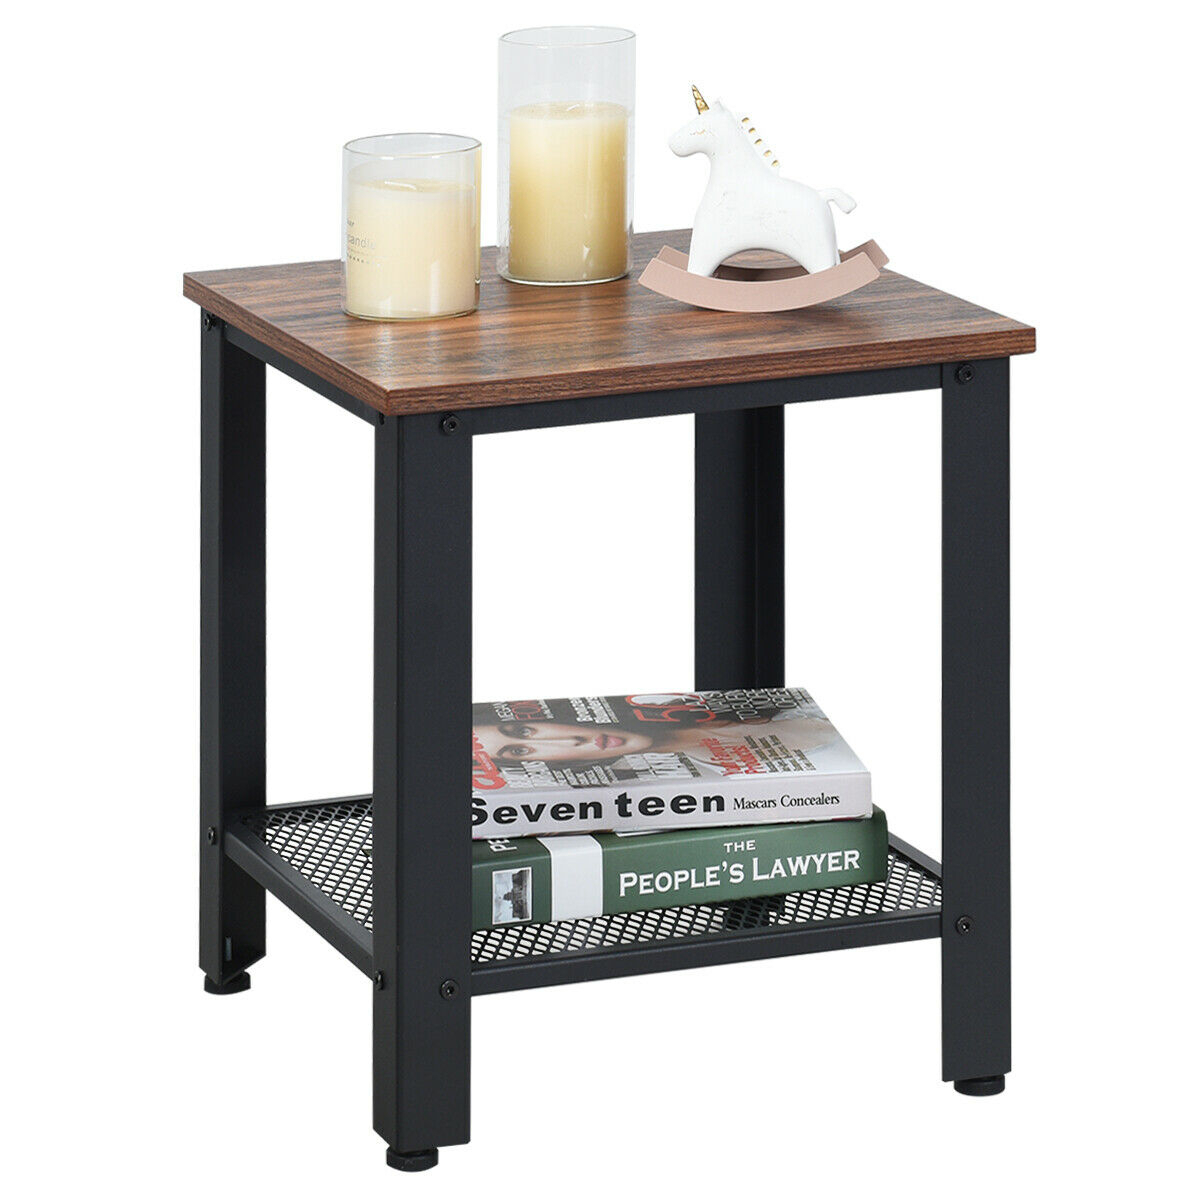 Industrial End Table 2-Tier Side Table W/Storage Shelf Rustic Sofa Table - Black